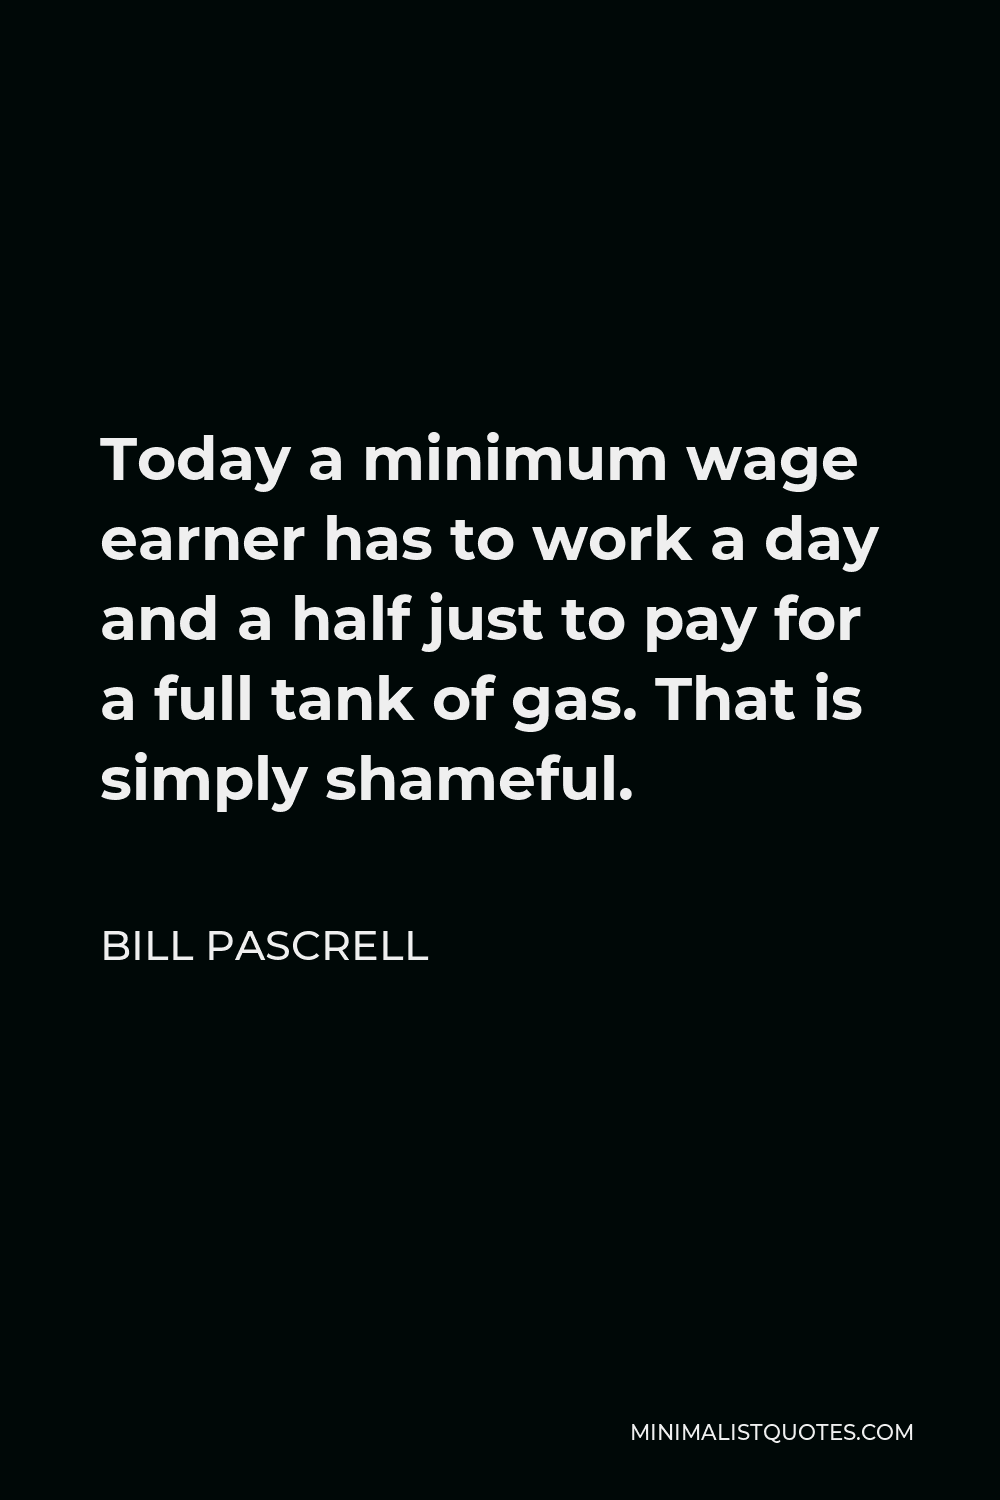 Bill Pascrell Quote - Today a minimum wage earner has to work a day and a half just to pay for a full tank of gas. That is simply shameful.